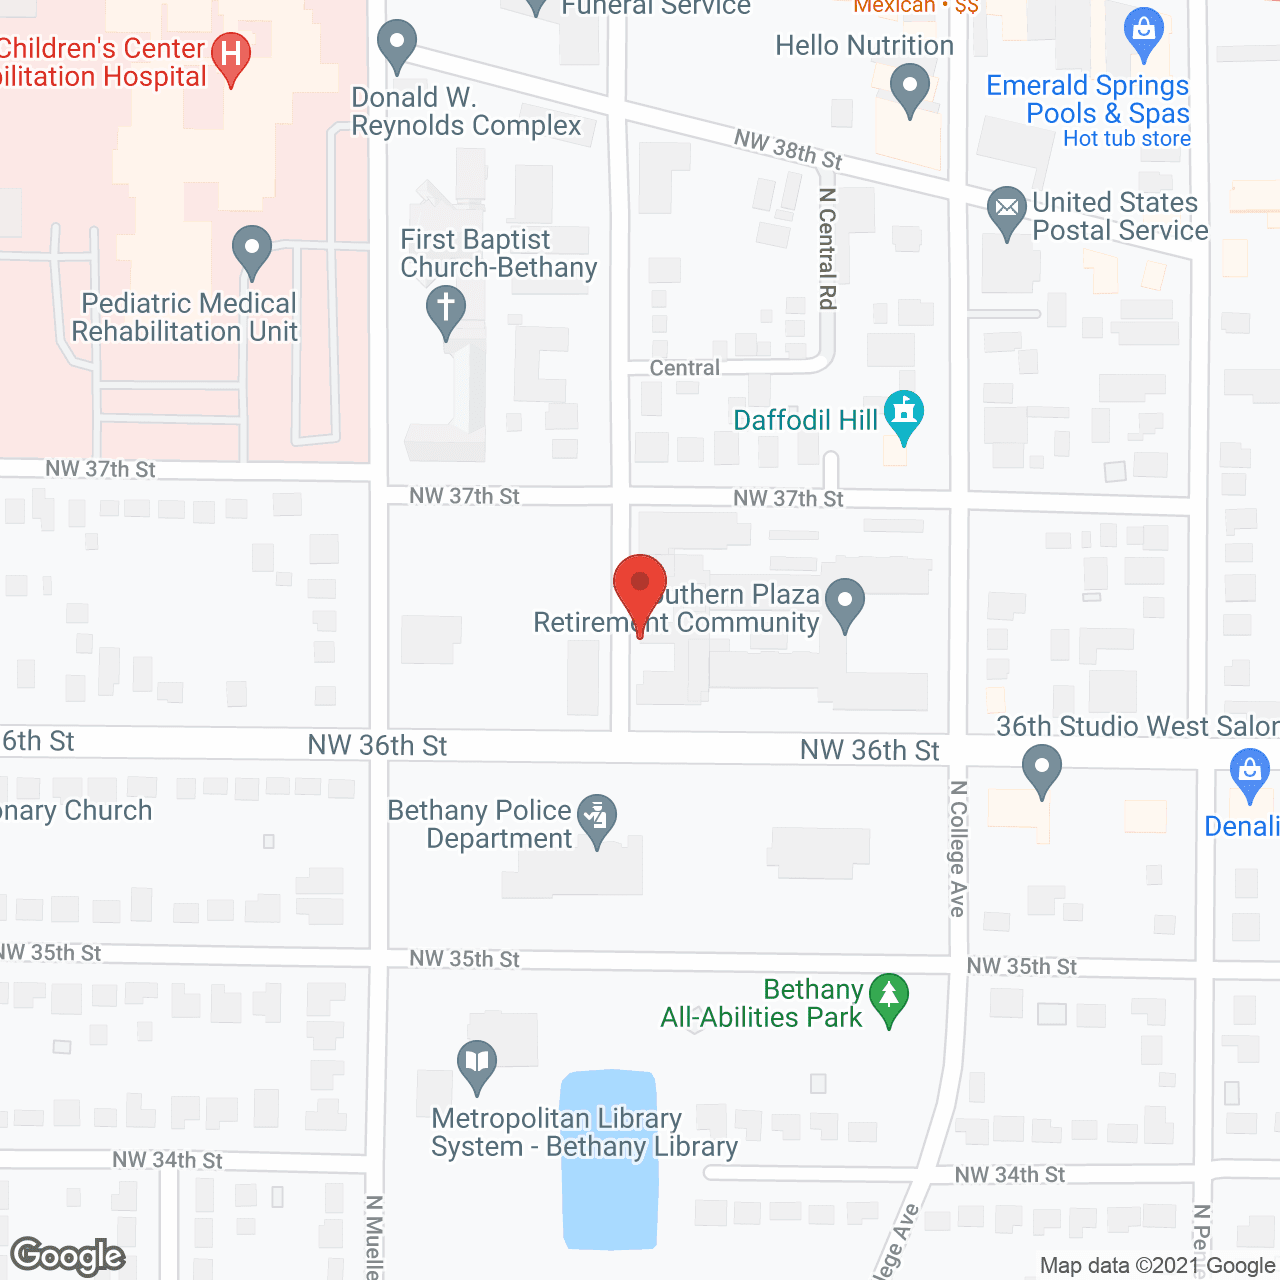 Southern Plaza Assisted Living and Memory Care in google map